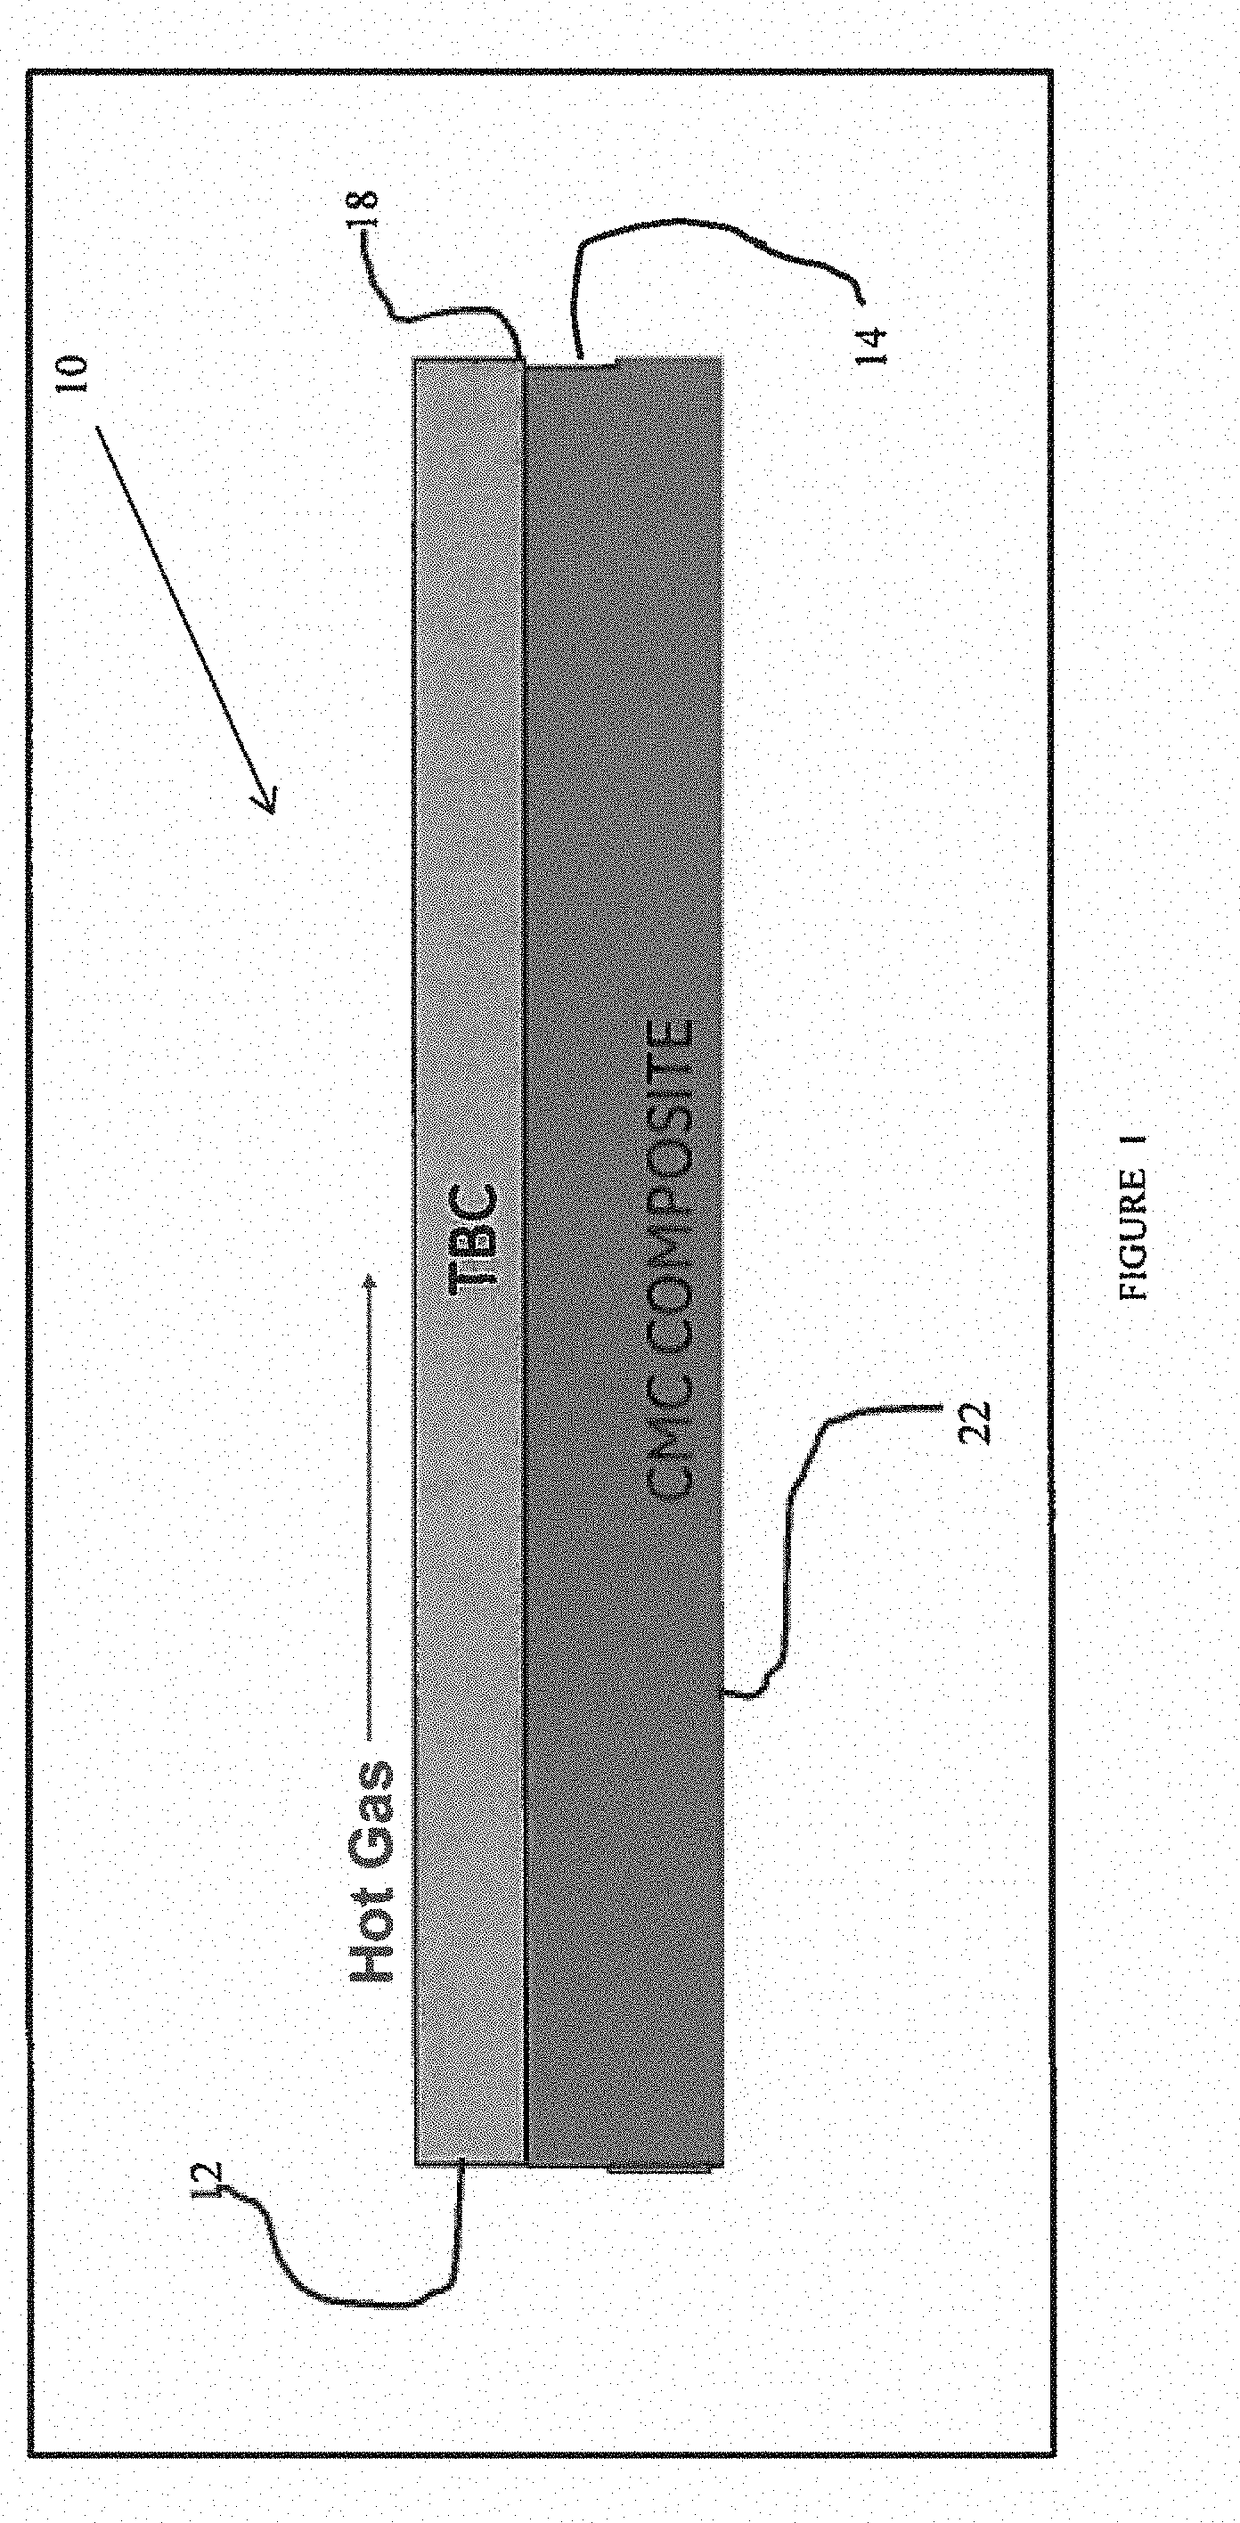 Nondestructive inspection method for coatings and ceramic matrix composites